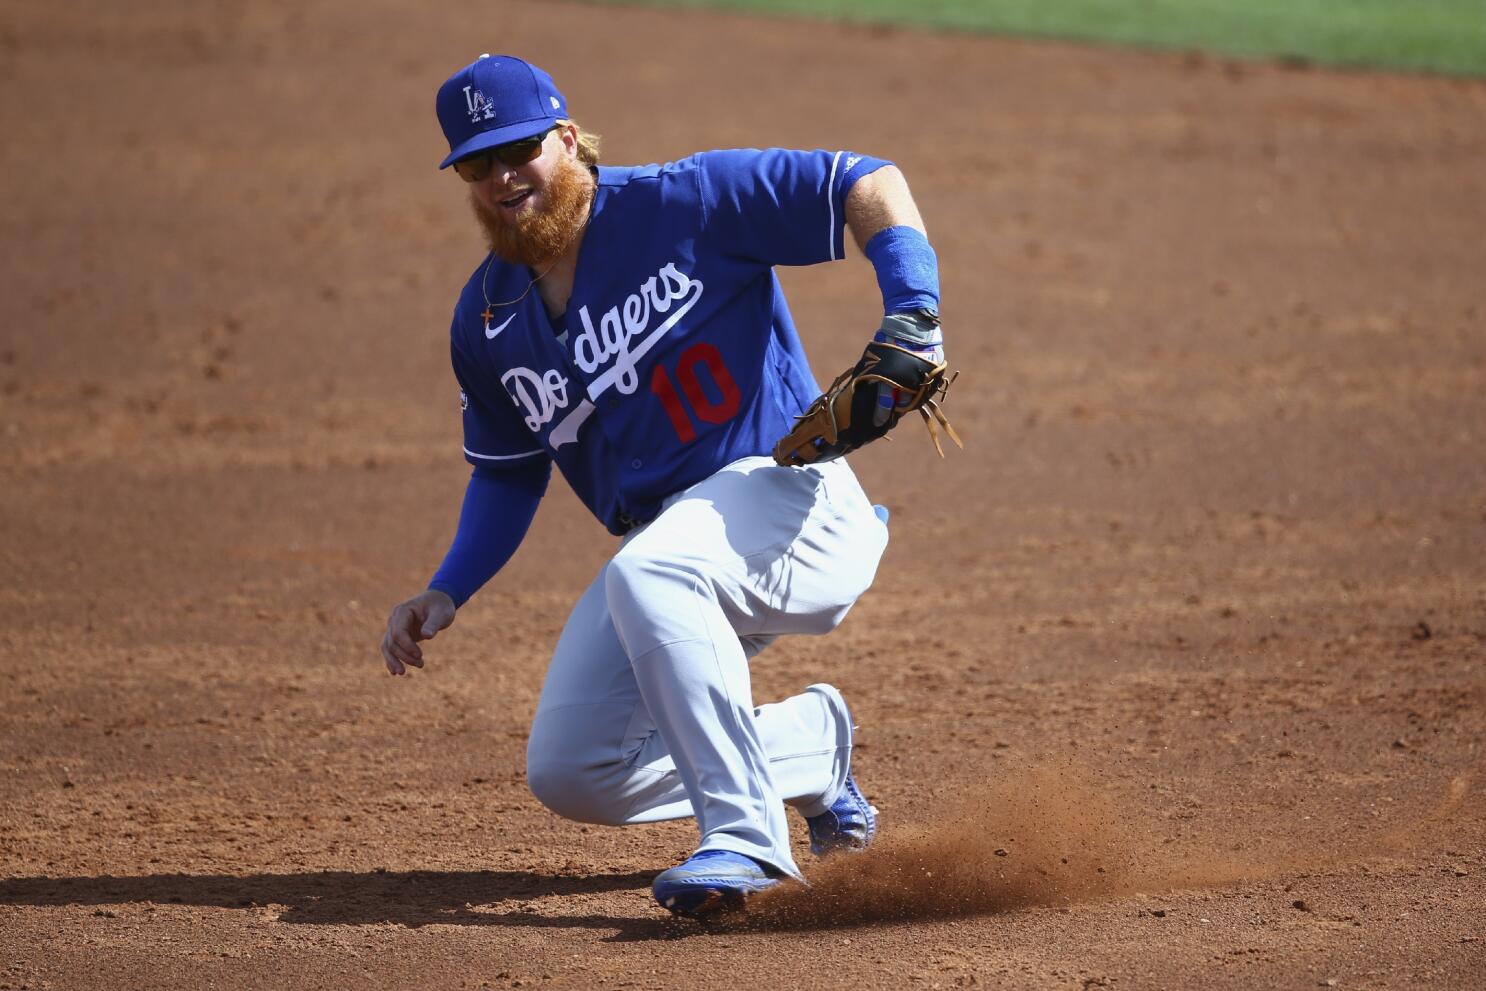 Justin Turner is hit by pitch in Dodgers spring training win over Giants -  Los Angeles Times